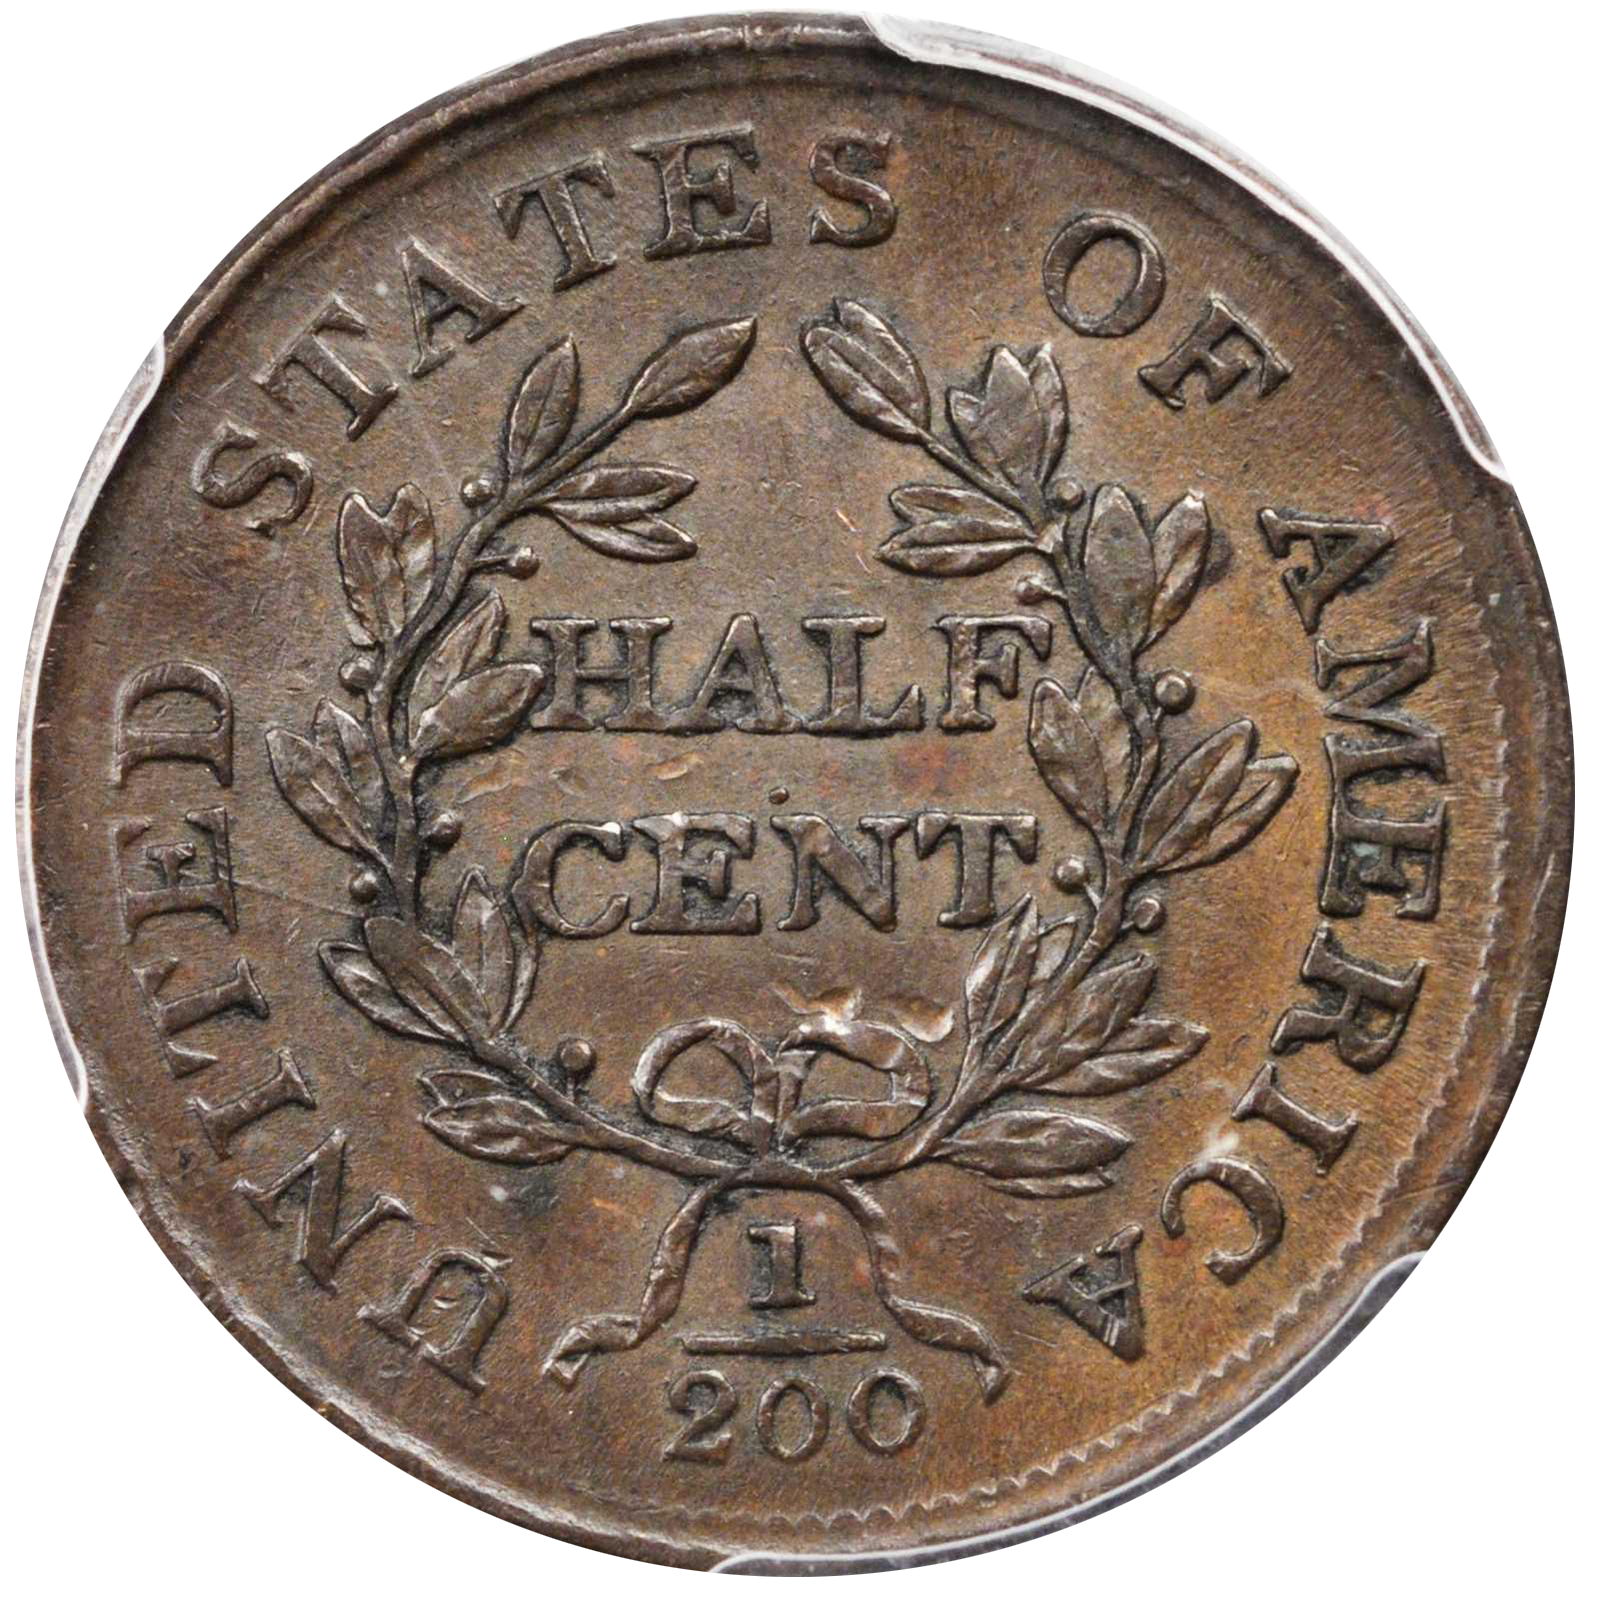 Value of 1804 Draped Bust 1/2 Cent | Sell to Rare Coin Buyer